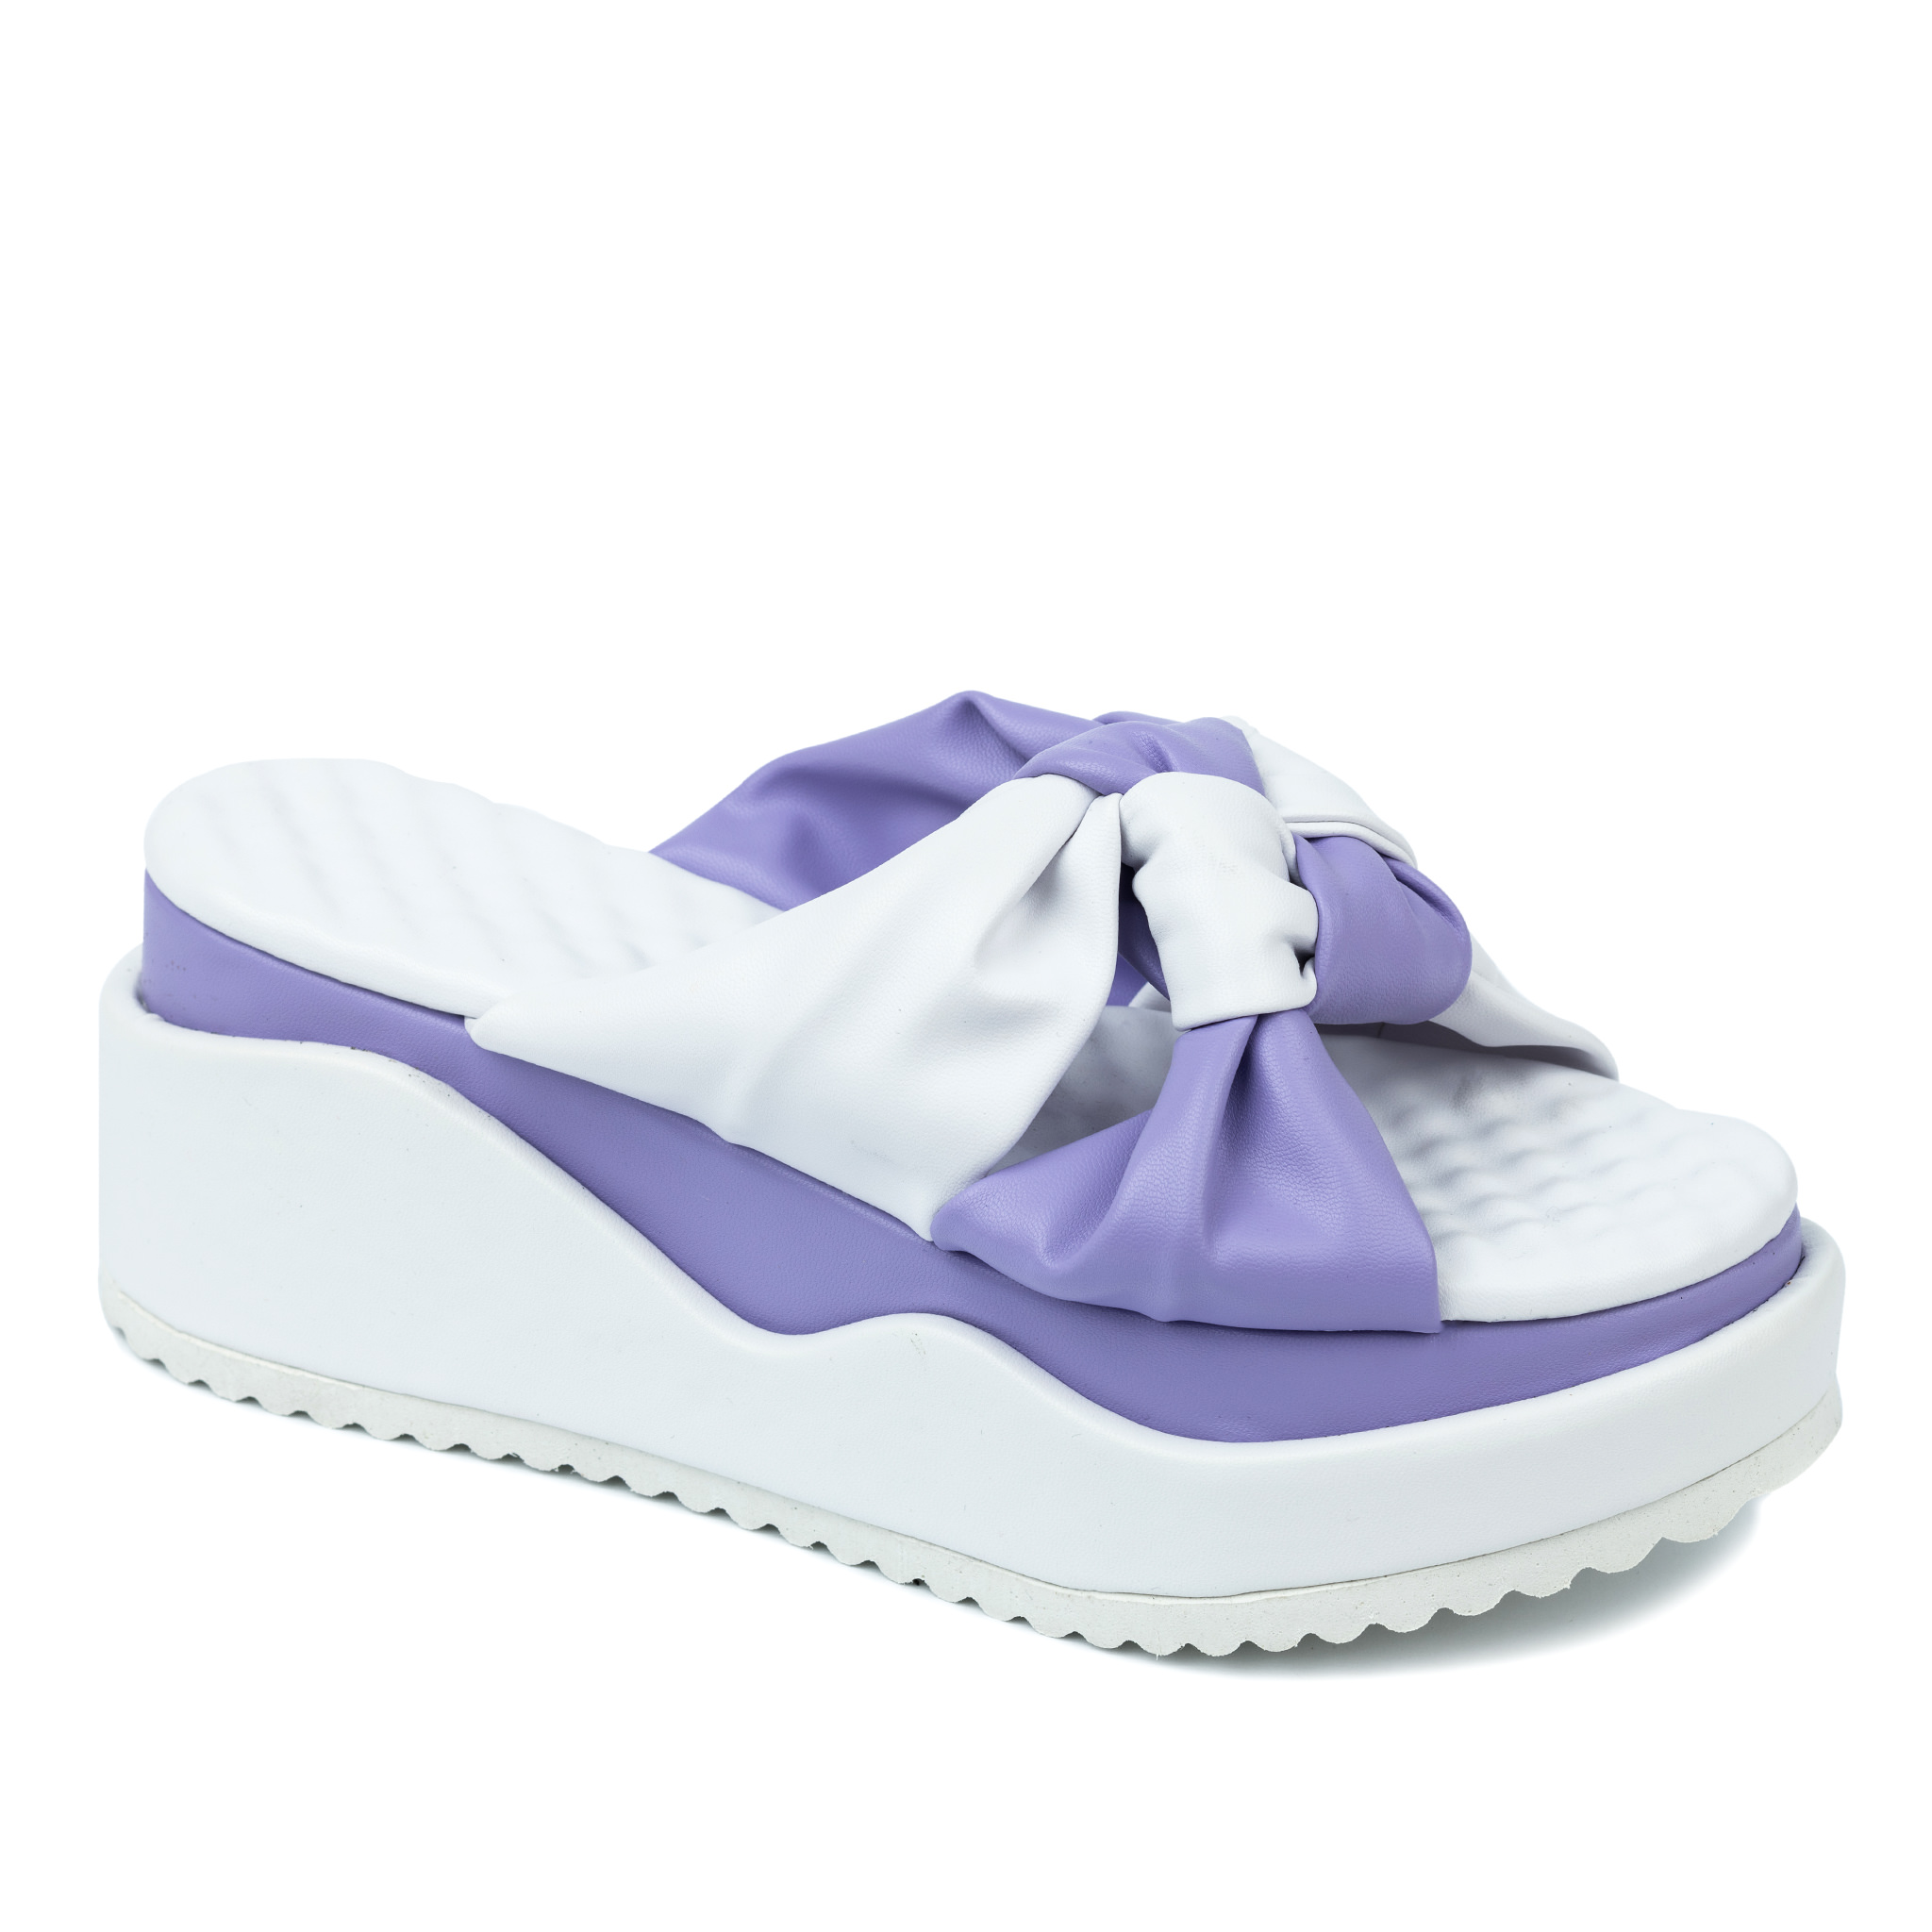 Women Slippers and Mules A308 - VIOLET